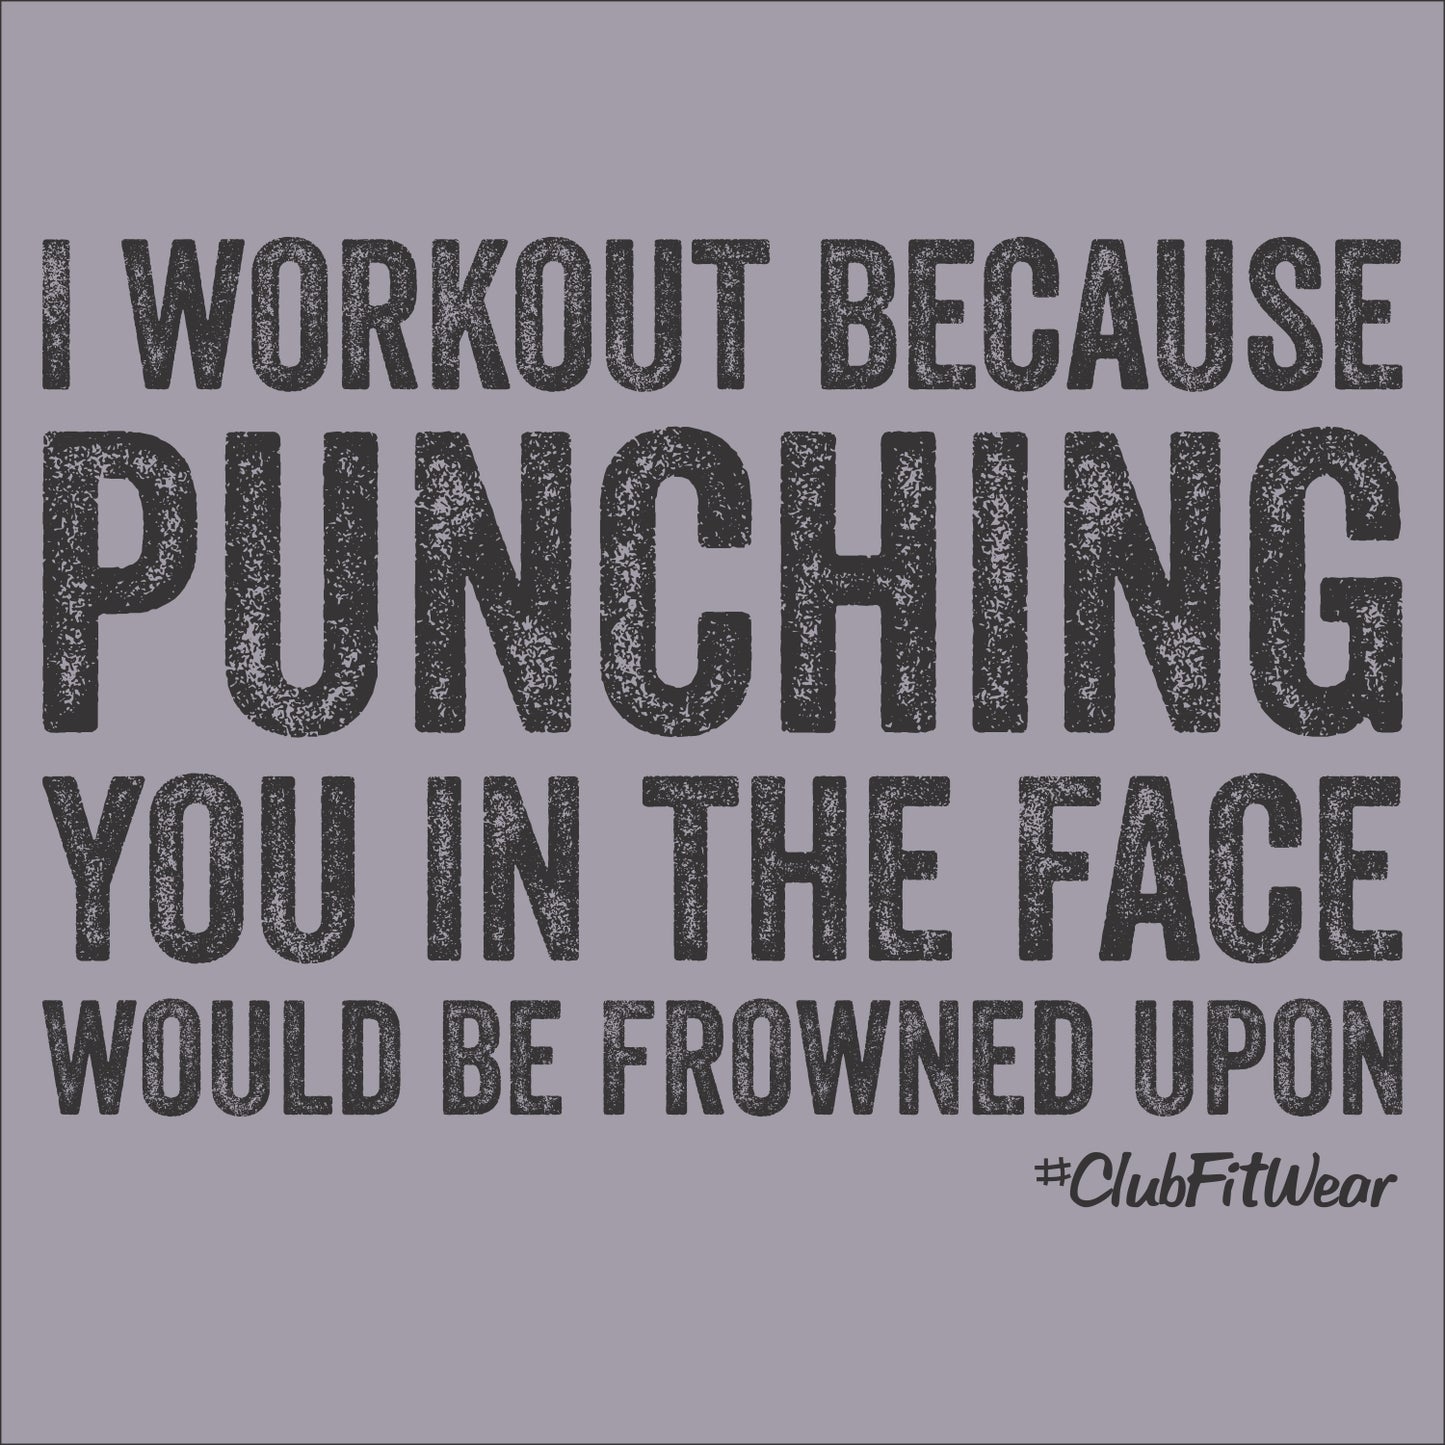 I workout because punching you in the face would be frowned upon